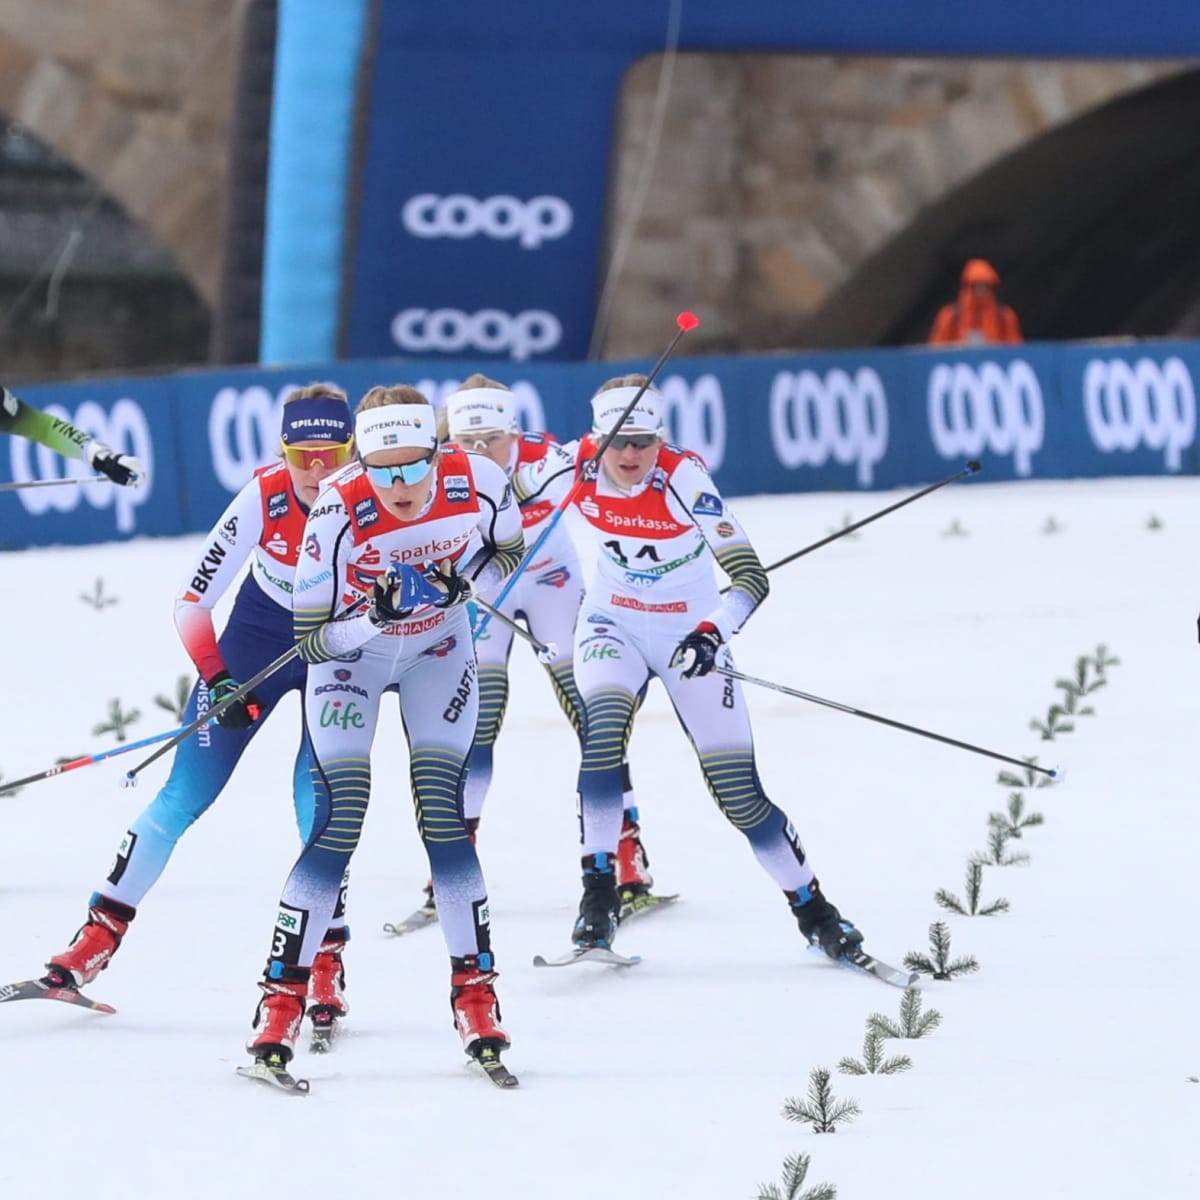 Minneapolis to host cross-country skiing World Cup in 2024